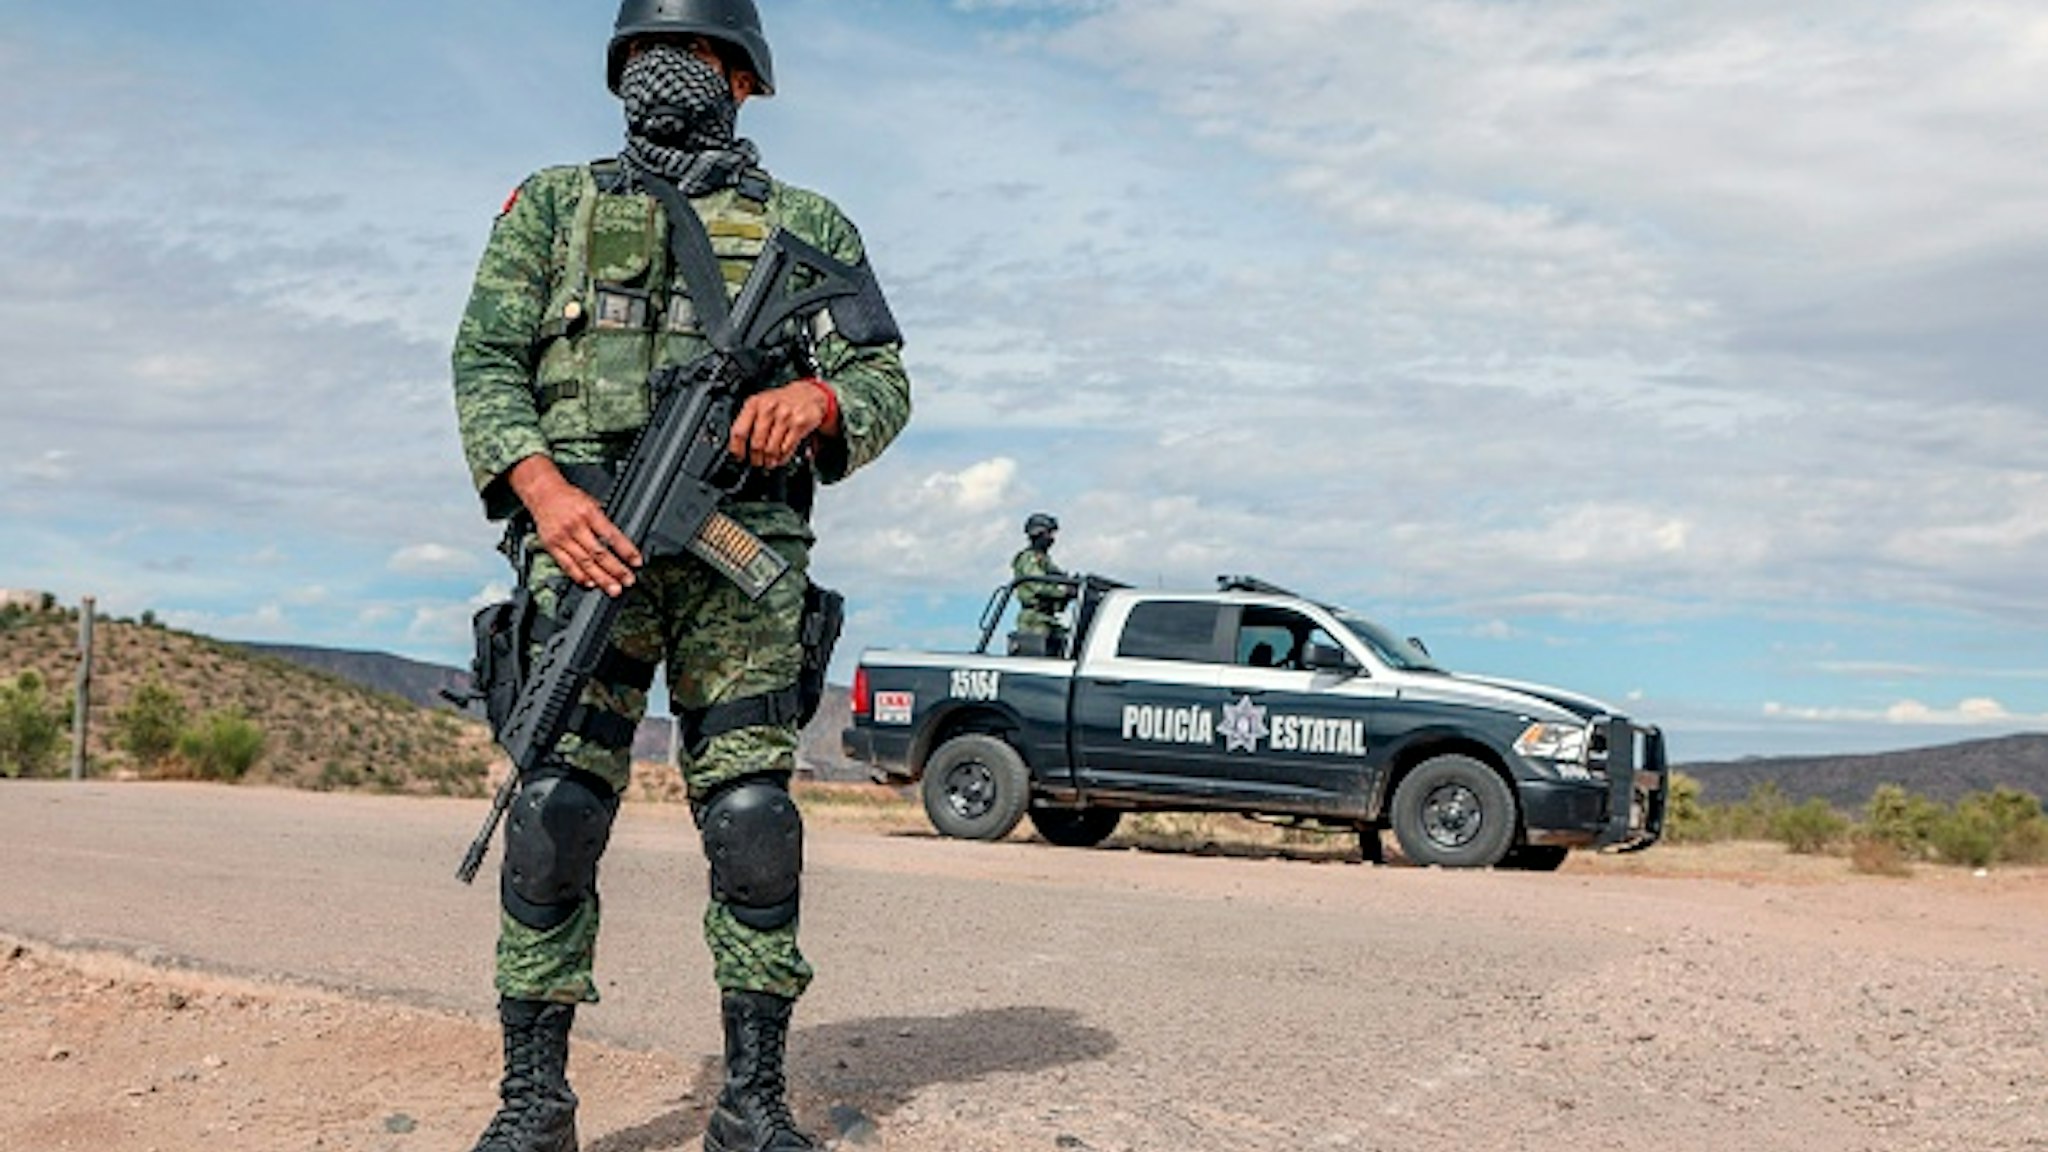 Members of the National Guard stand guard near La Morita ranch, belonging to the Mexican-American LeBaron family -of which nine members were killed in a hail of bullets on November 4- in Bavispe, Sonora state, Mexico, on November 6, 2019. - Mexican authorities said Wednesday they believe a drug cartel called "La Linea" was responsible for the murder of the three women and six children, saying the massacre was committed with American-made ammunition. Eight other children managed to escape, six of them wounded.